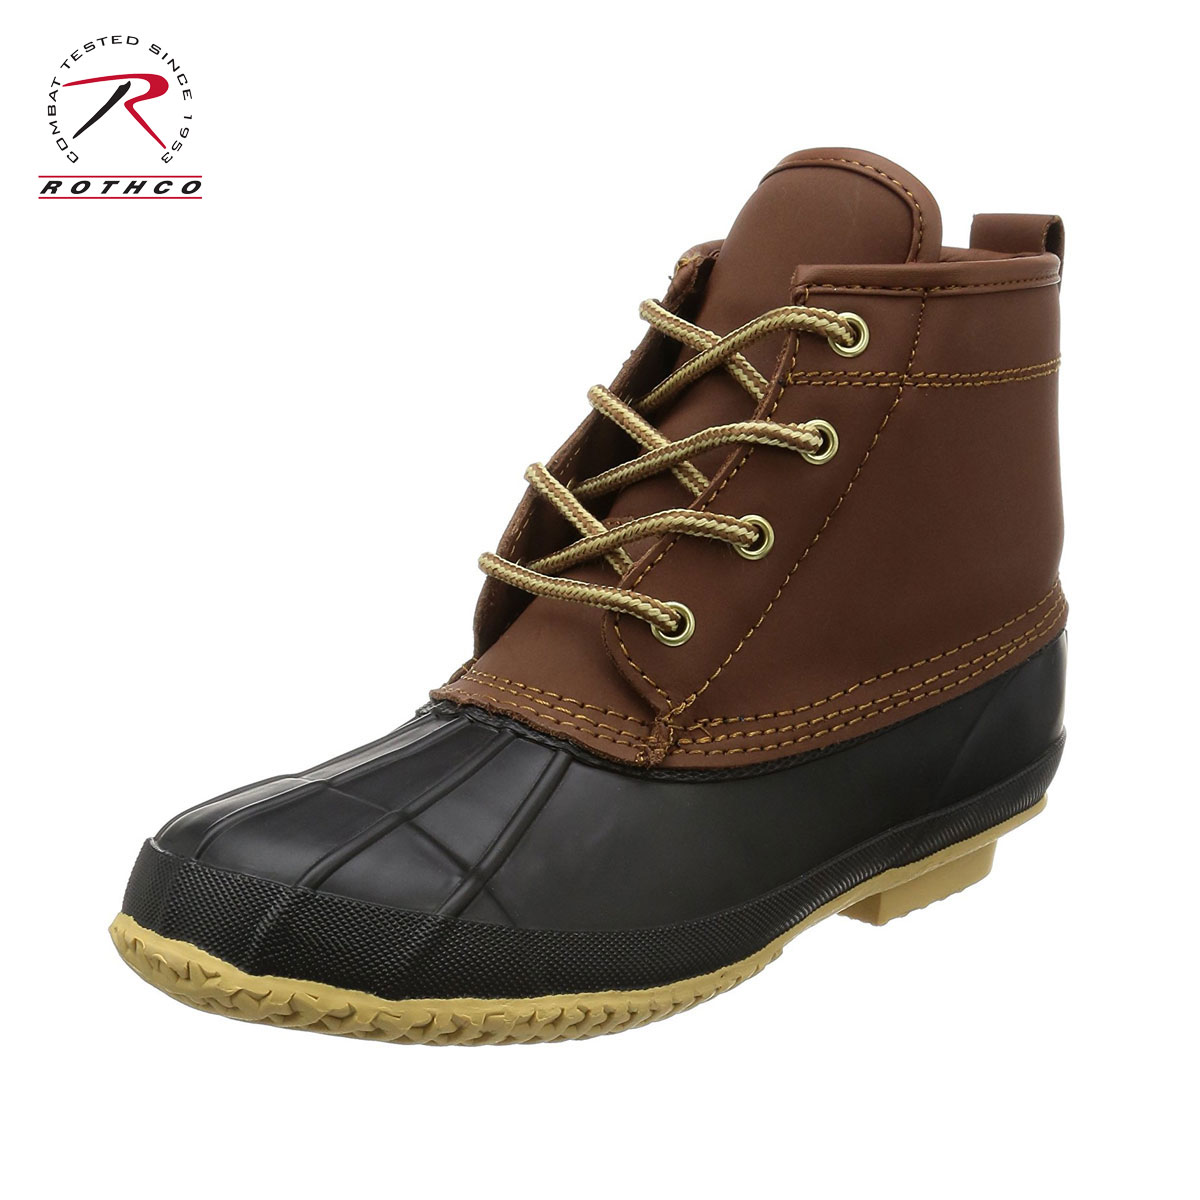 XR ROTHCO Ki Y _bNu[c ROTHCO 6 ALL WEATHER DUCK BOOTS 5468